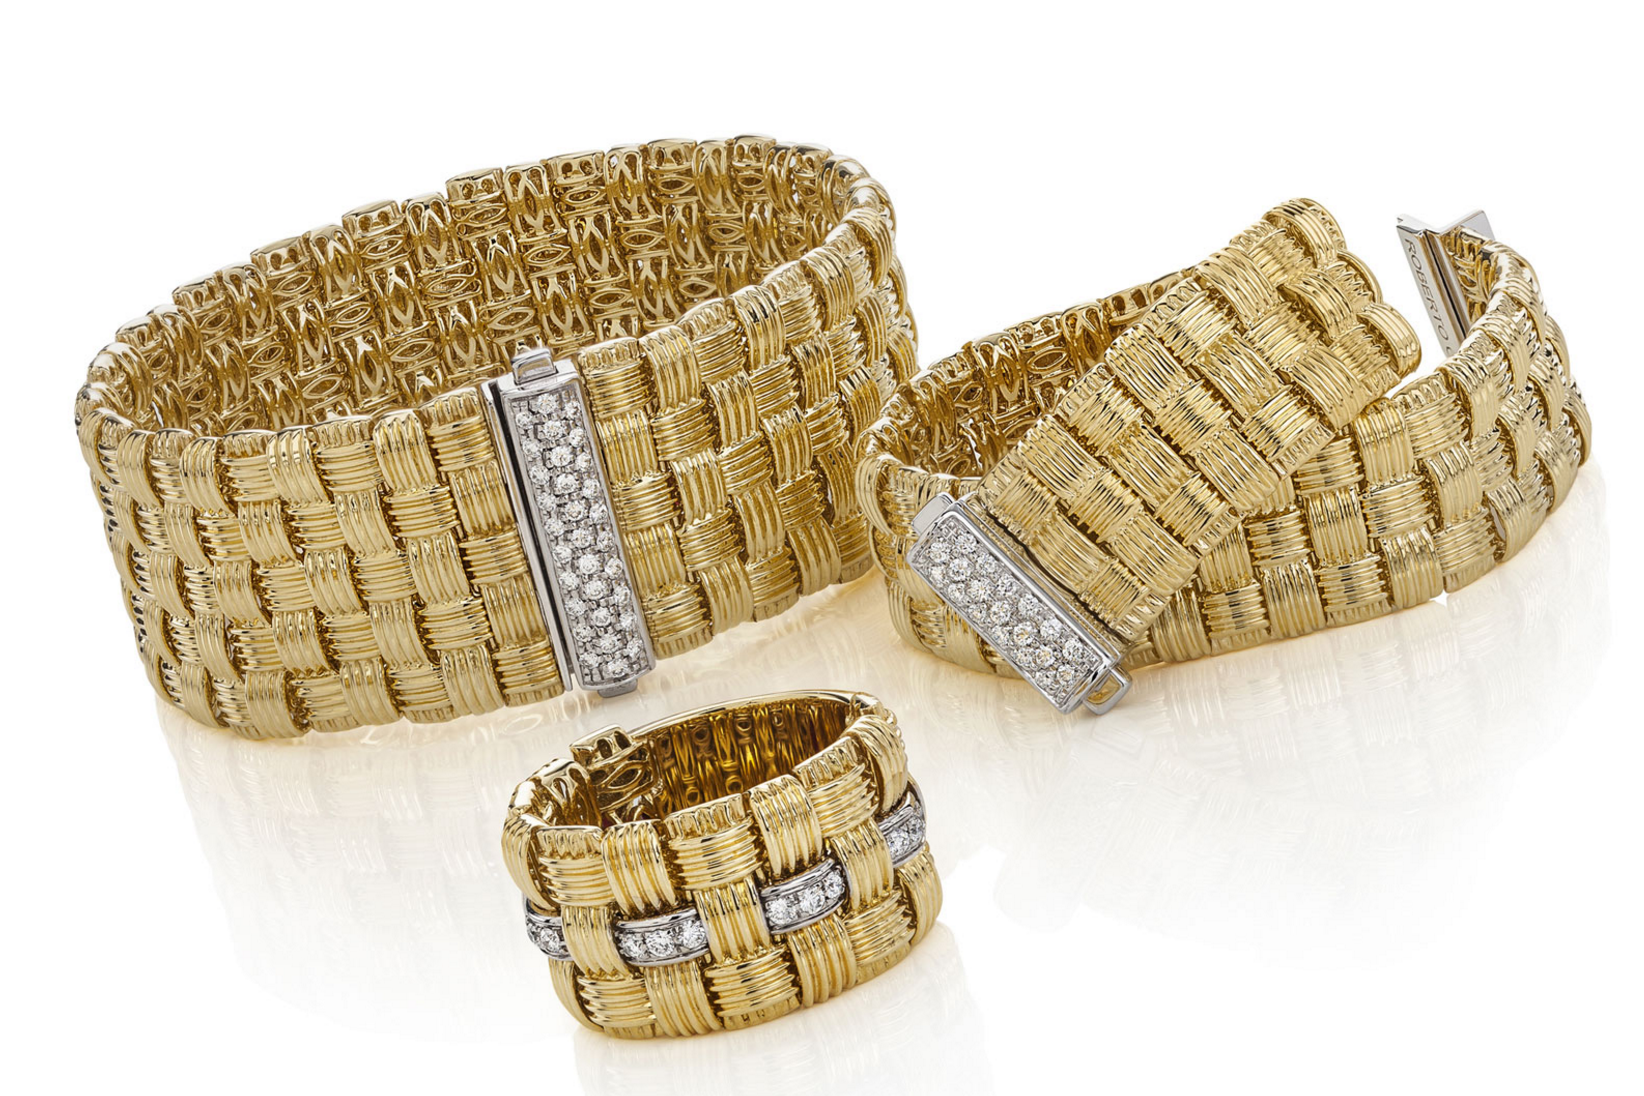 Roberto Coin Appassionata gold and diamond bracelets and rings